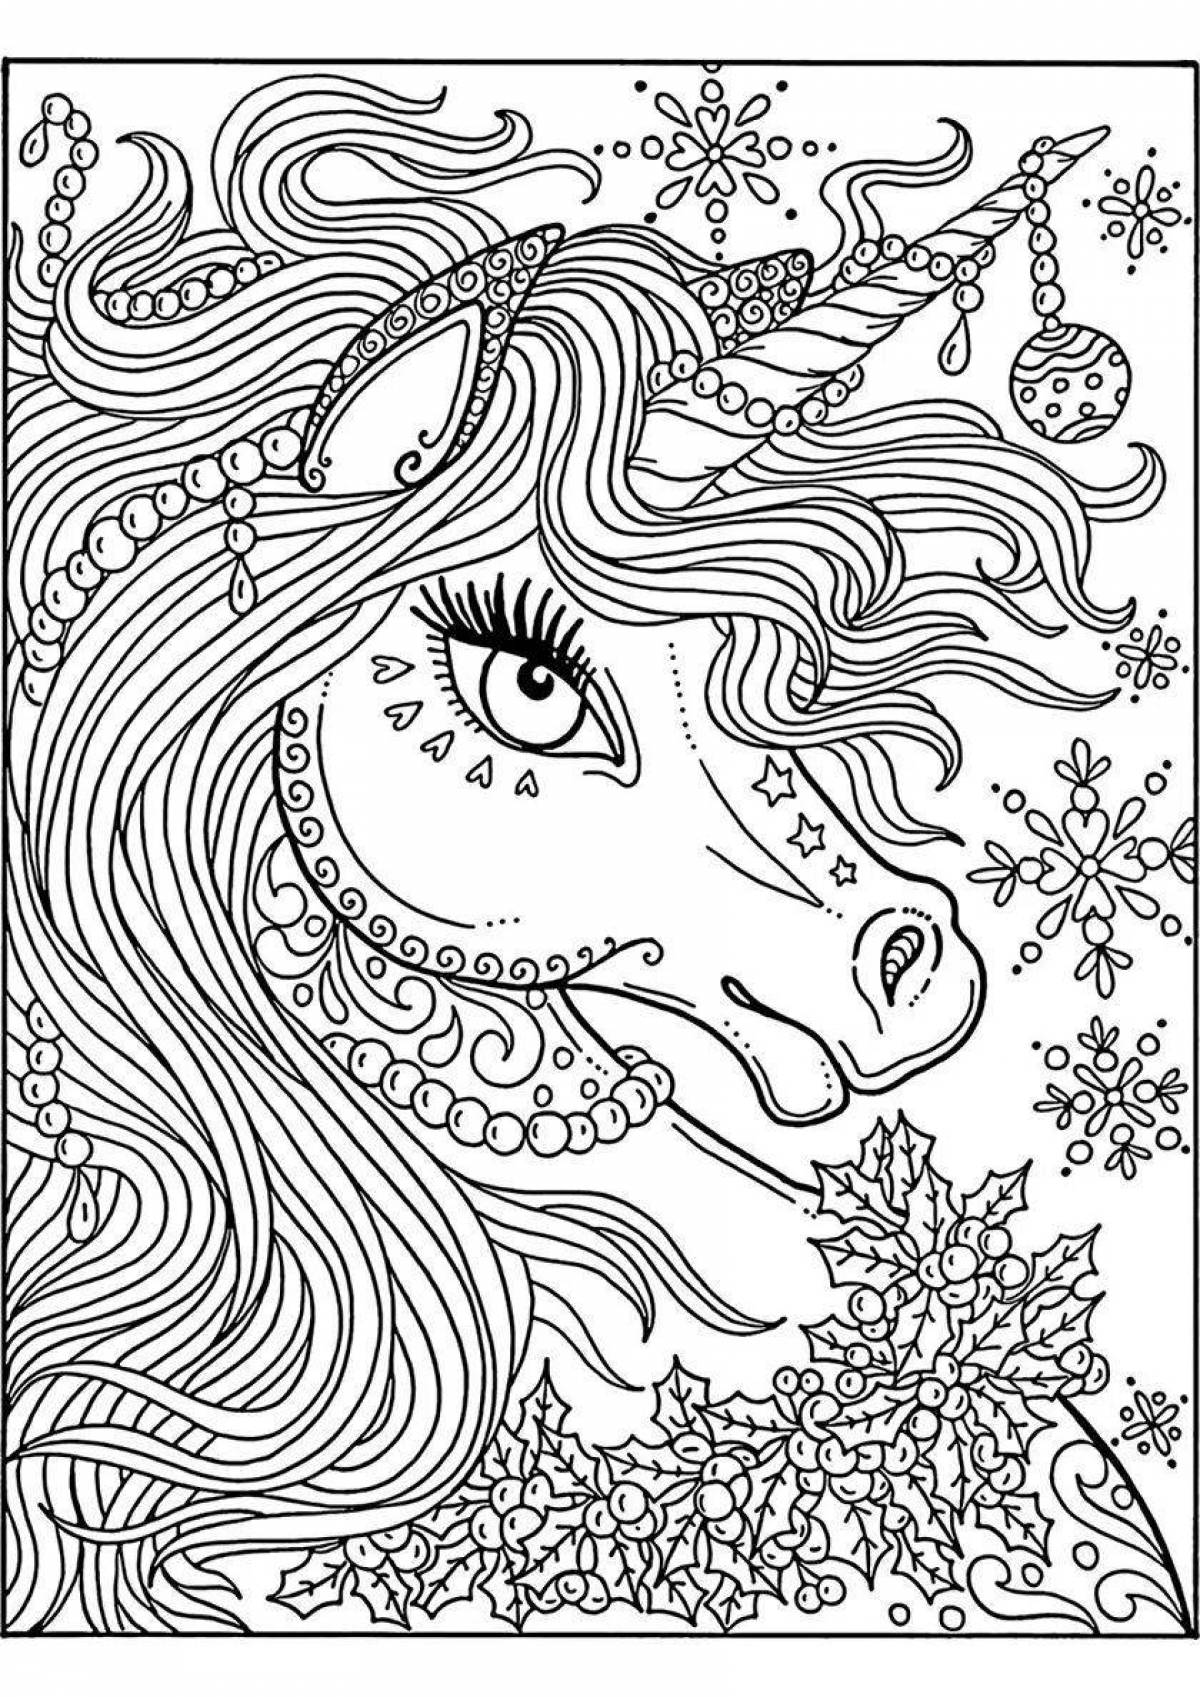 Exquisite coloring book for girls 7 years old unicorn